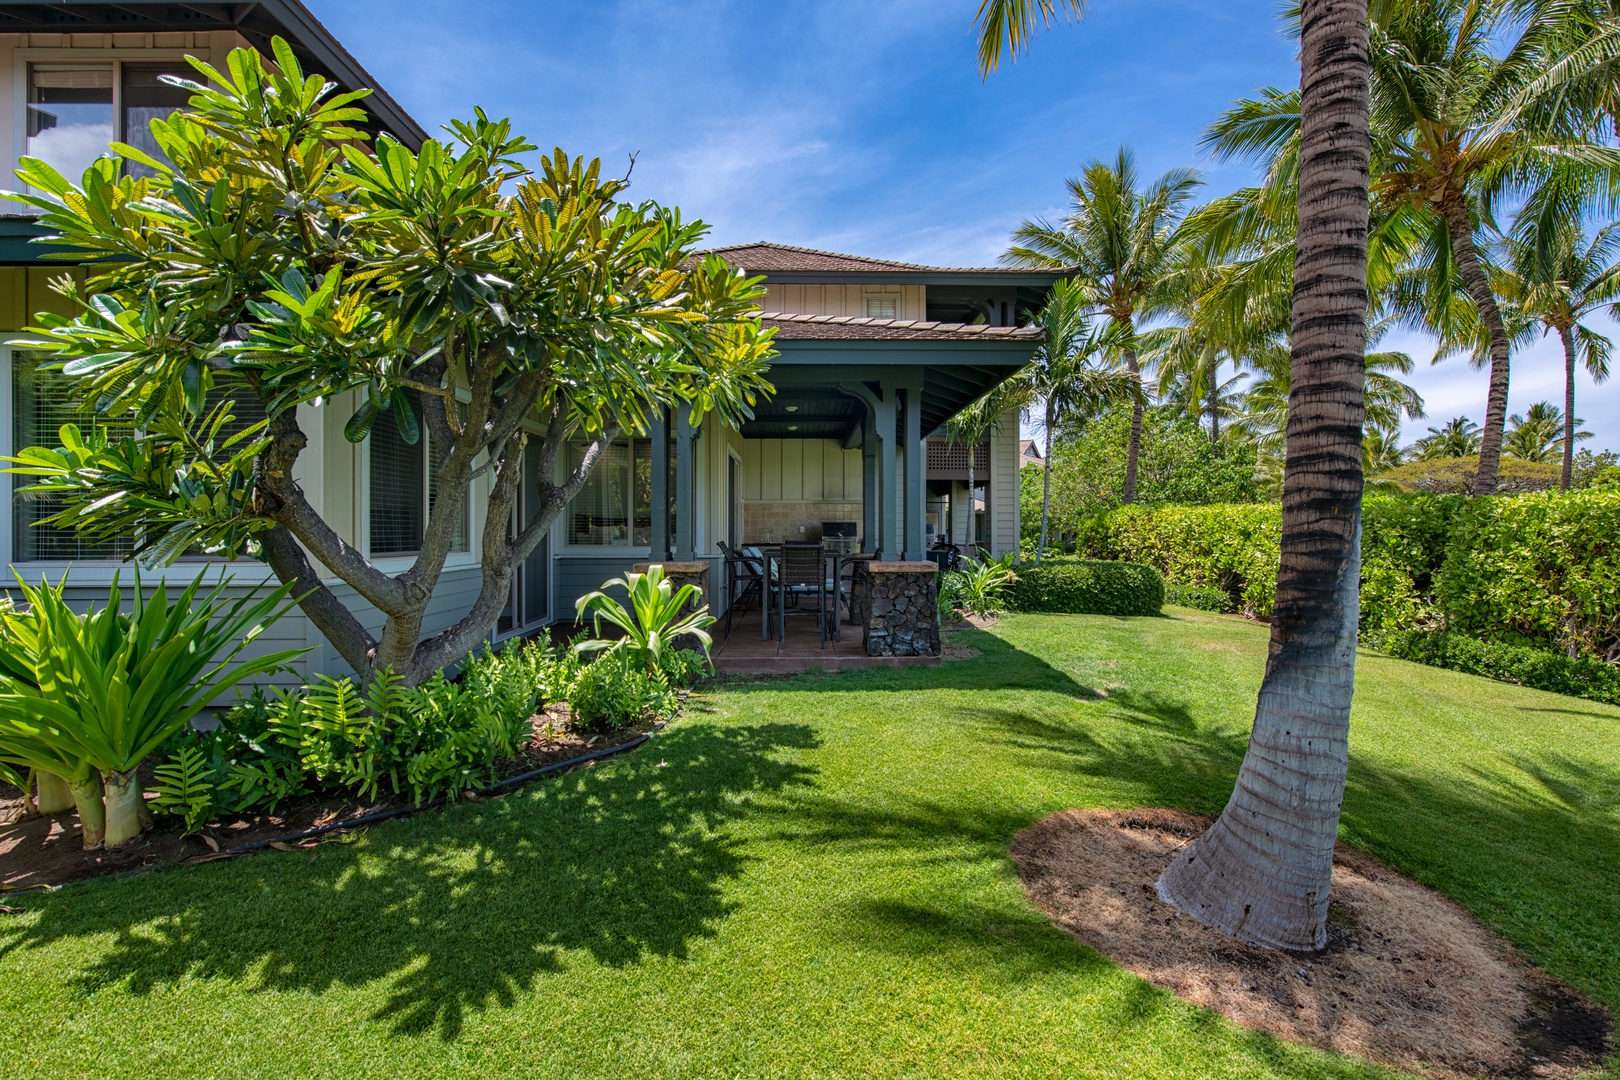 Kamuela Vacation Rentals, Palm View Villa - Tropical vibes all around!